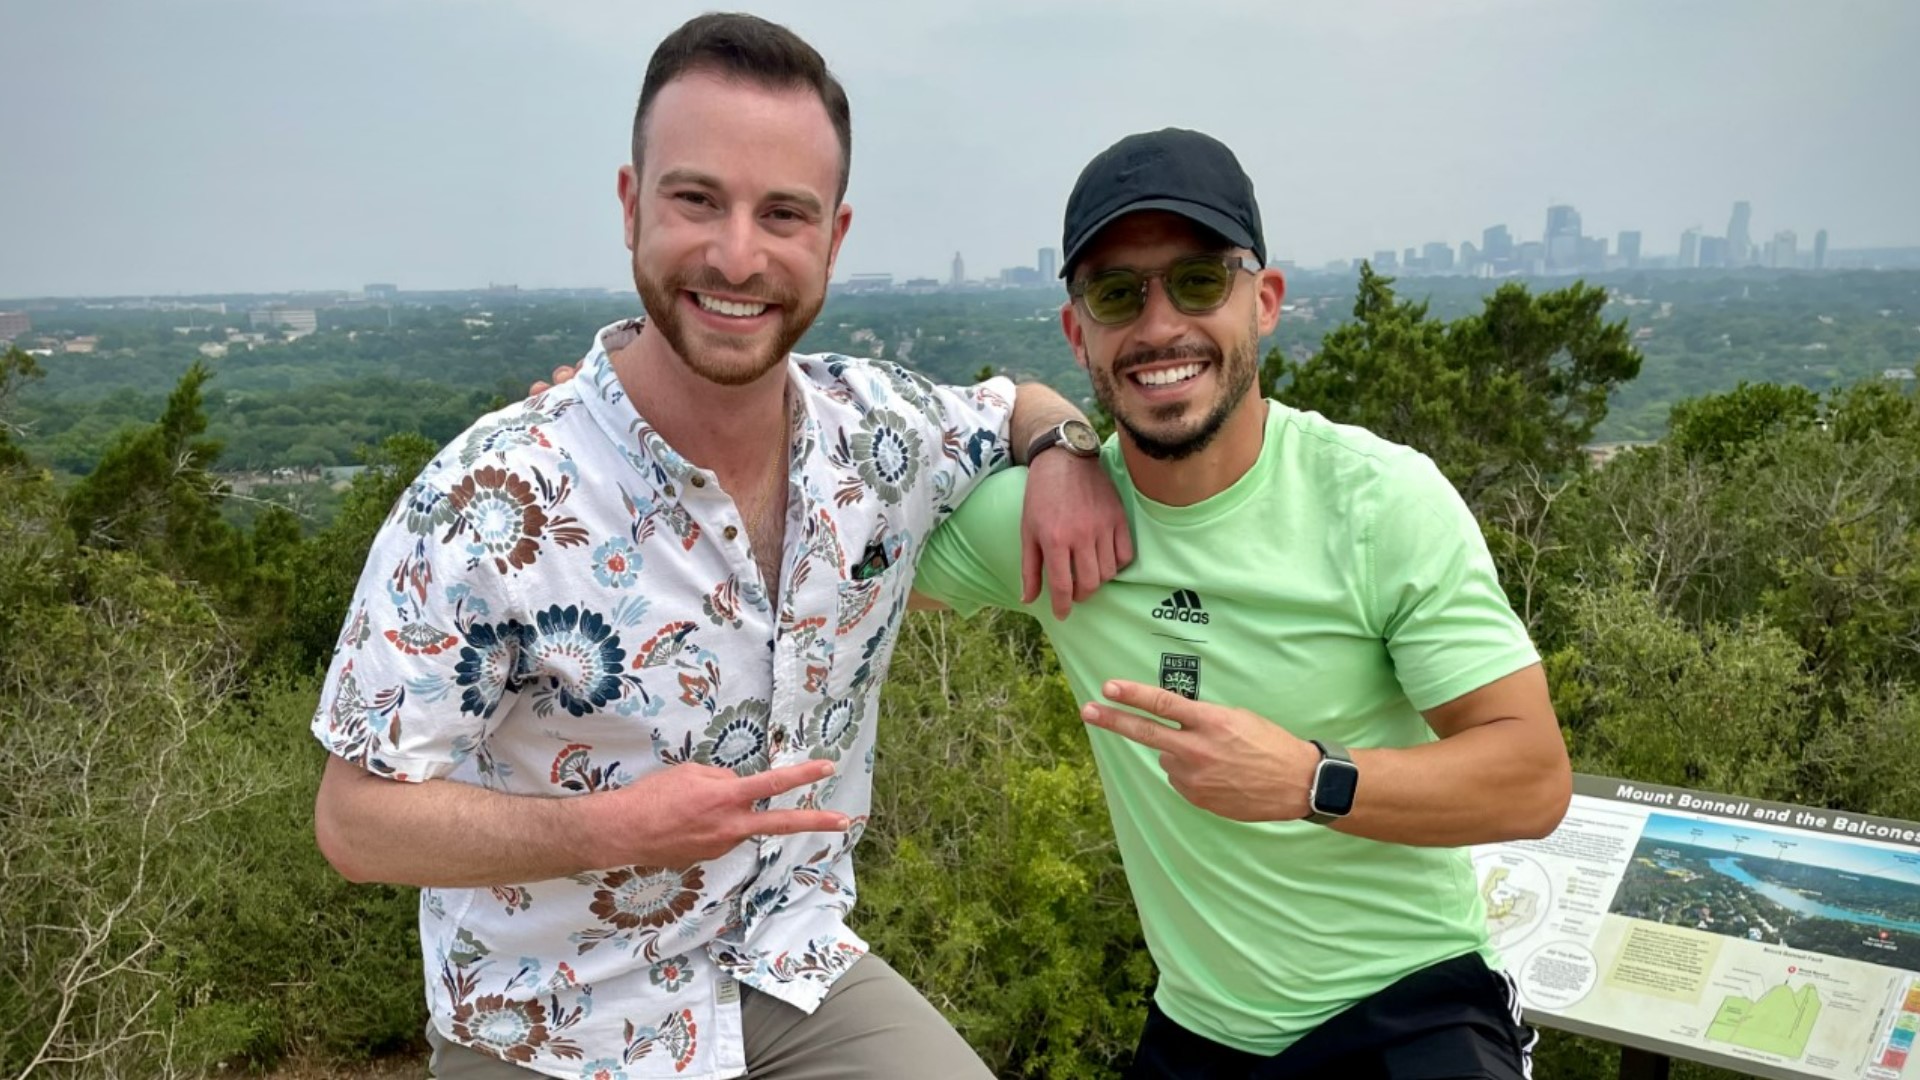 In KVUE's second episode of Outside the Box with Austin FC, Tyler Feldman climbs Mt. Bonnell with midfielder Felipe Martins.